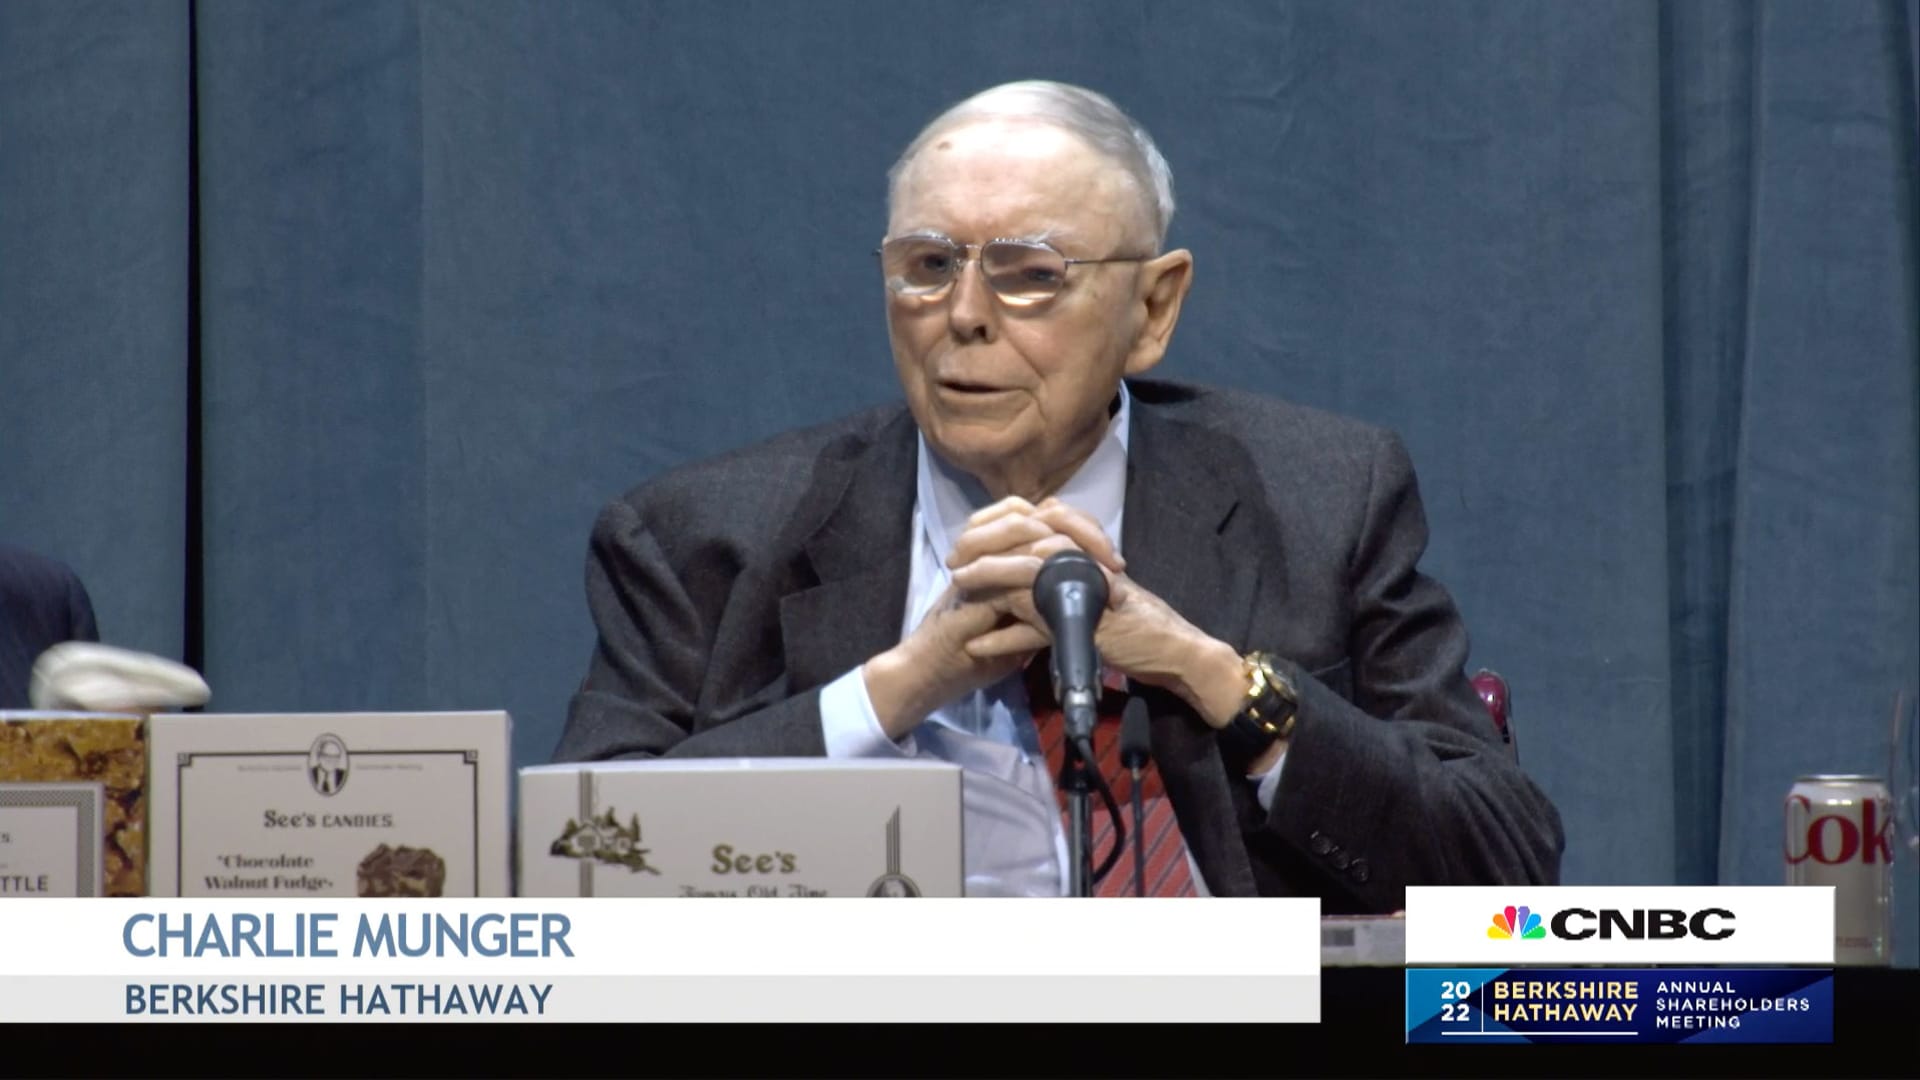 Top value investor on how Charlie Munger changed the craft